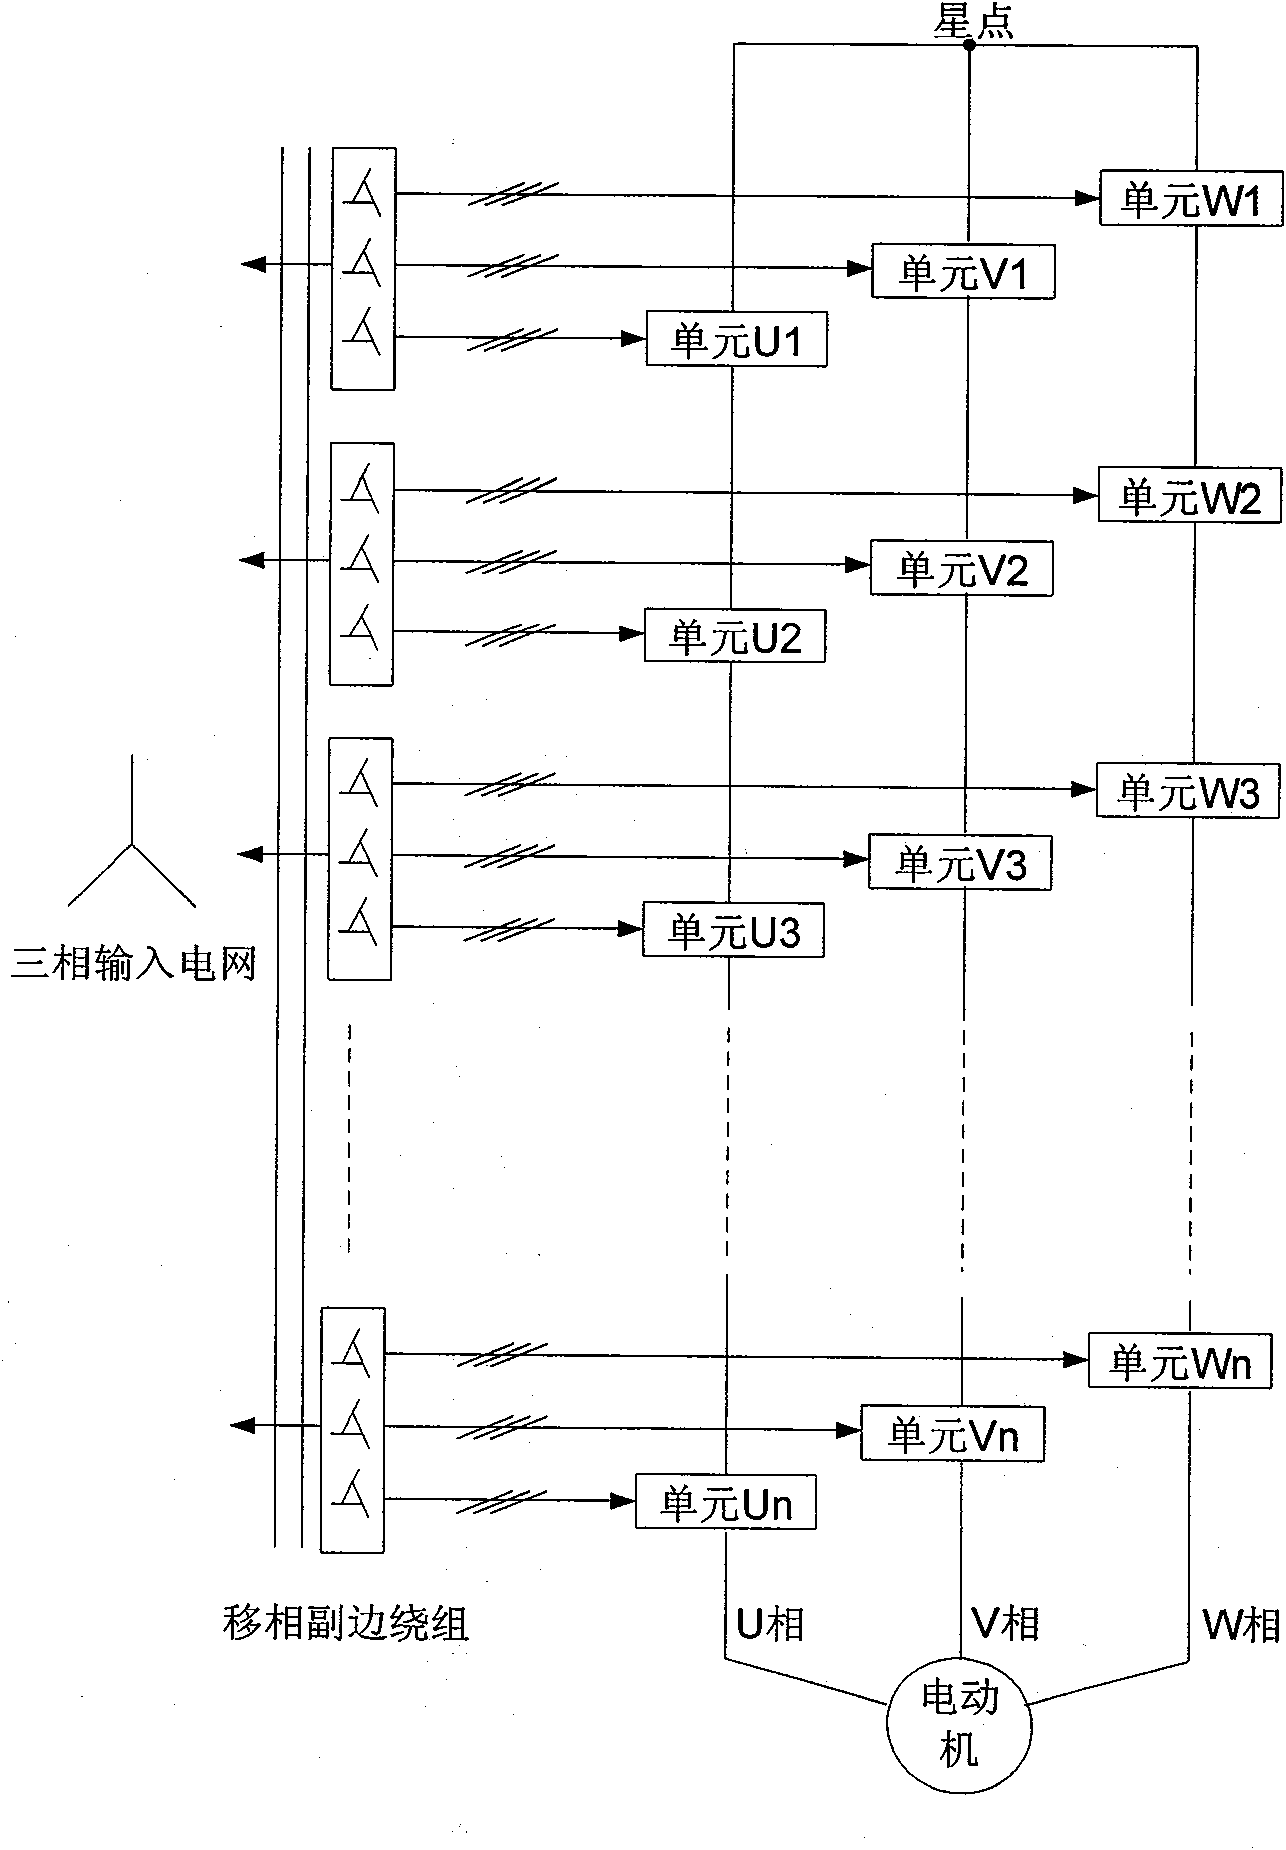 Instantaneous power-down rebooting method for grid of high-voltage frequency converter